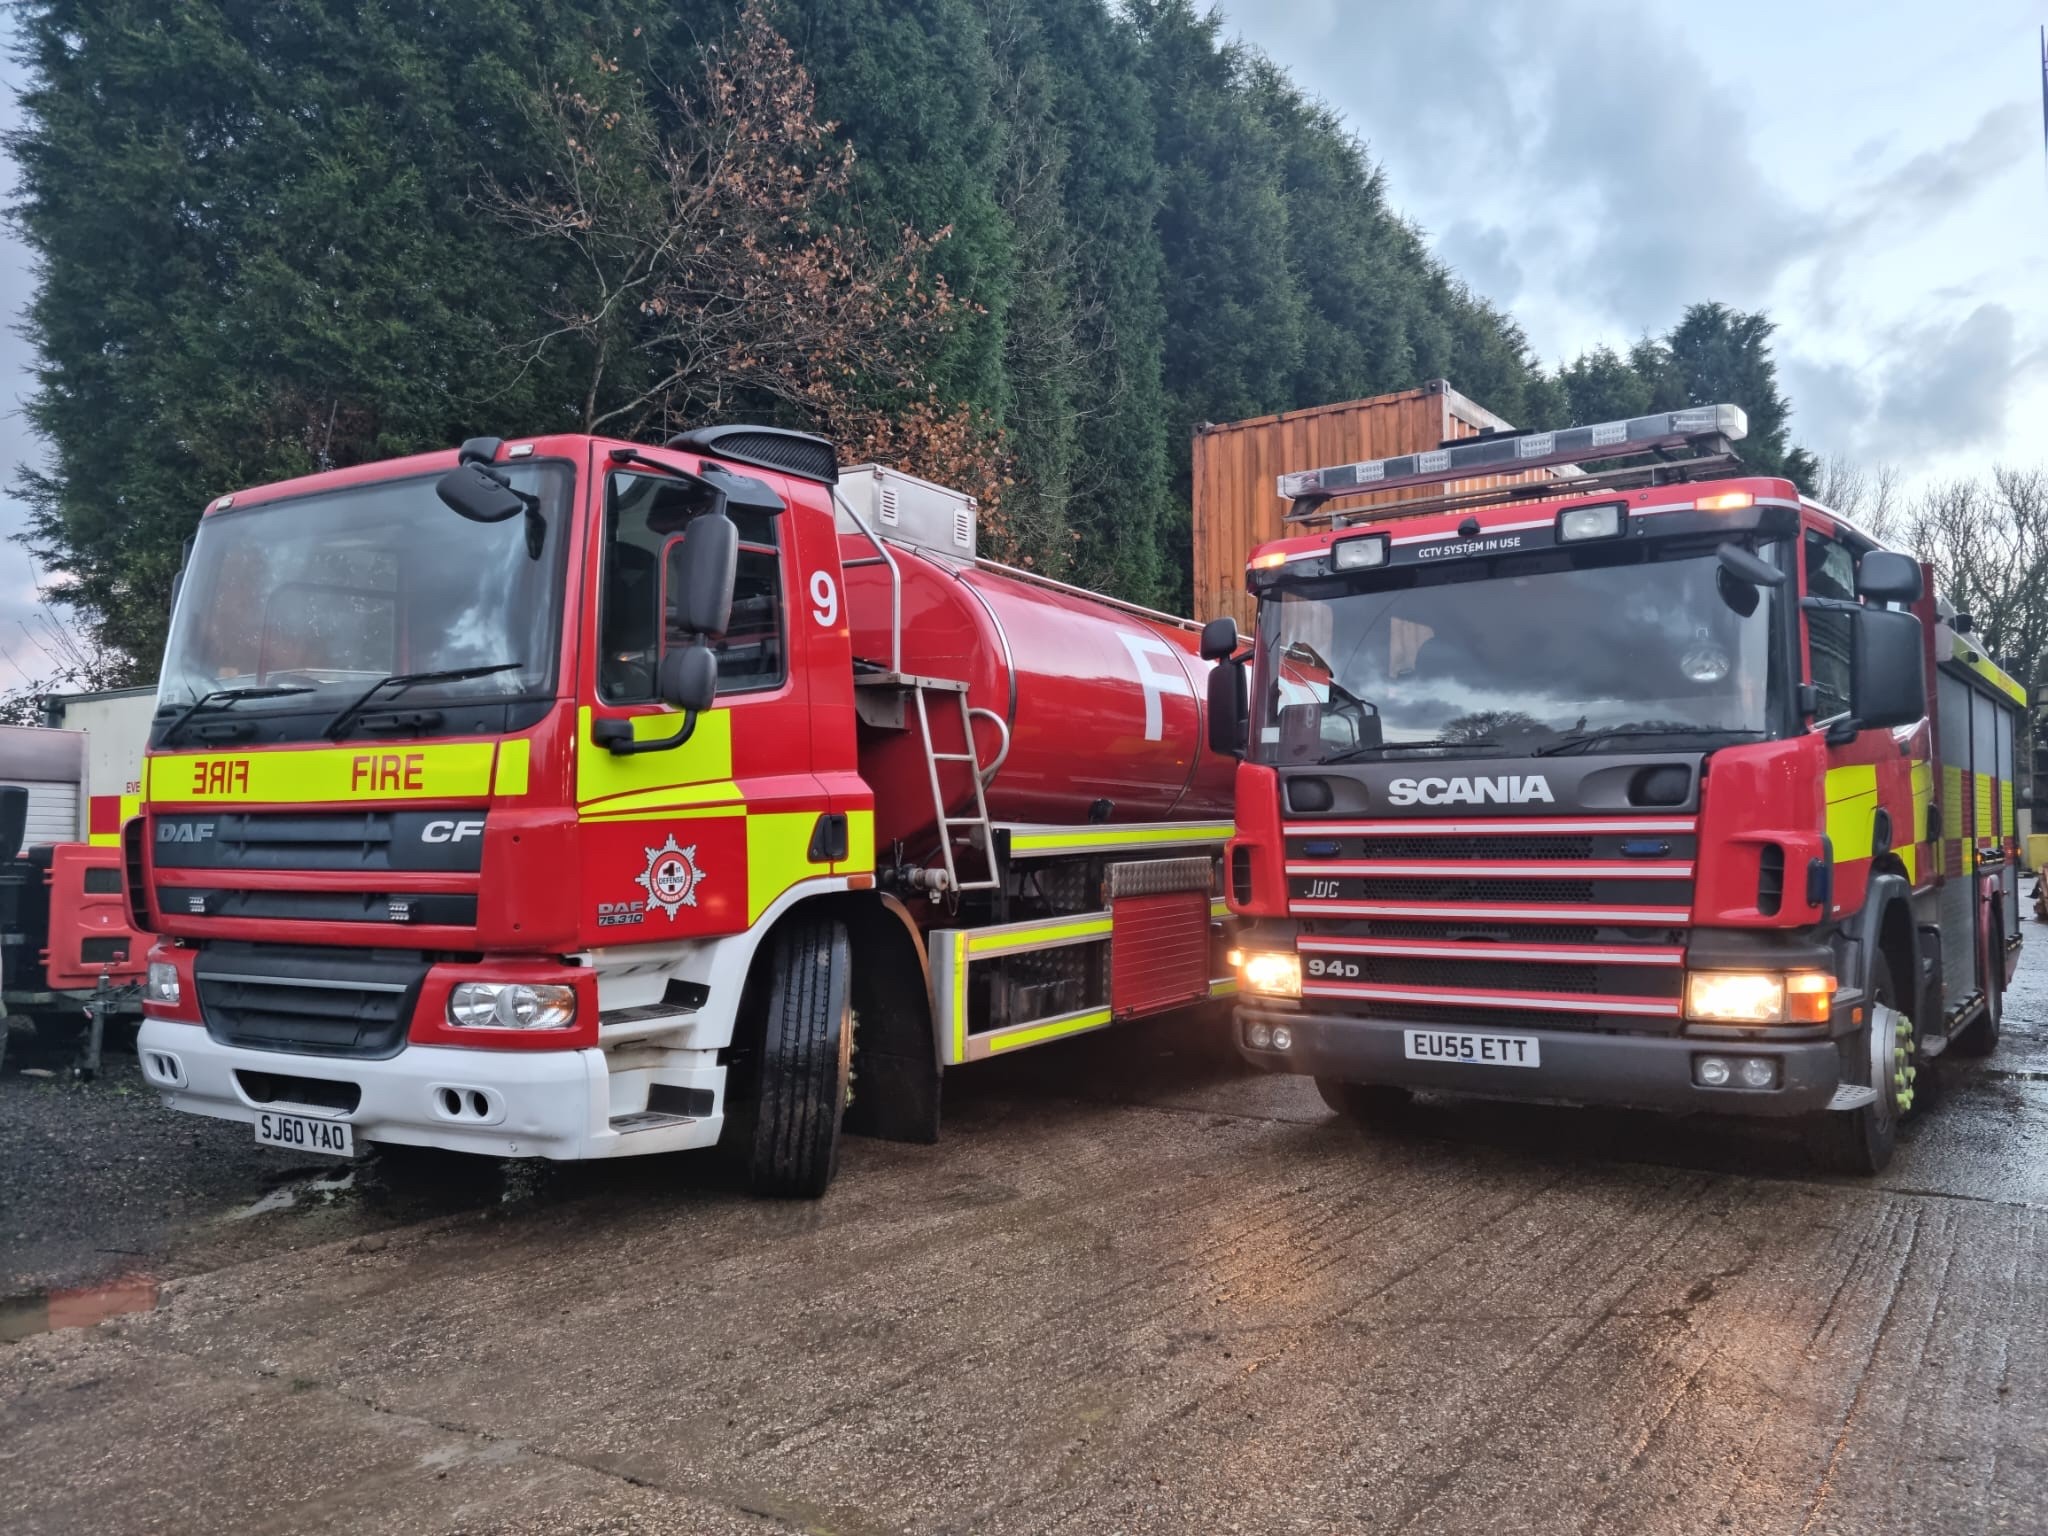 2 Fire Engines